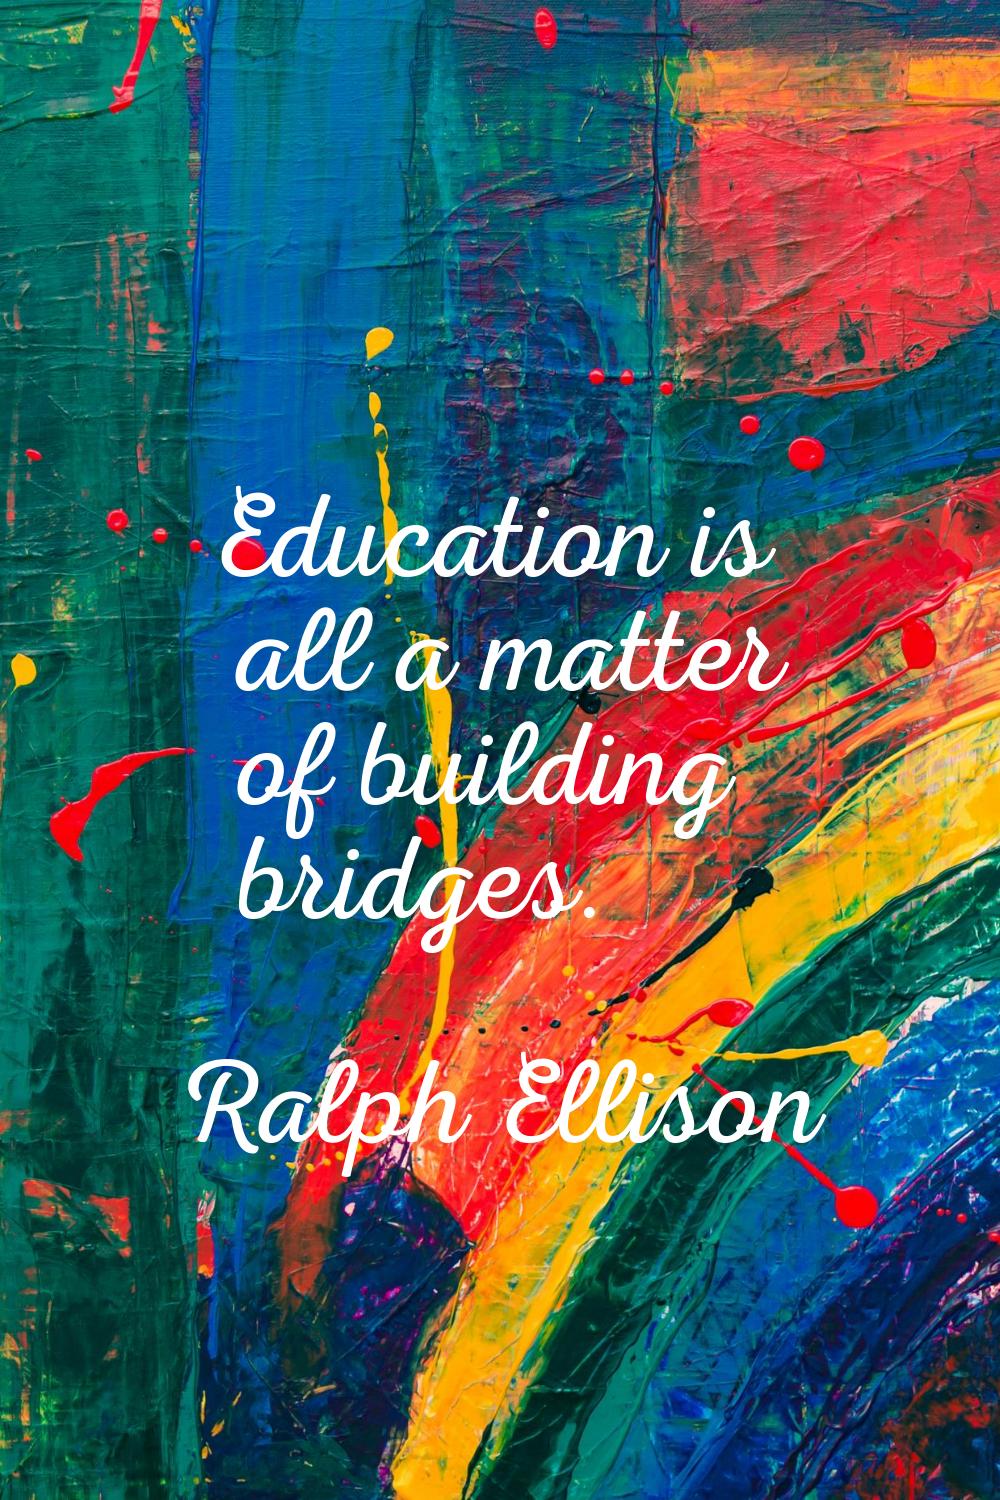 Education is all a matter of building bridges.